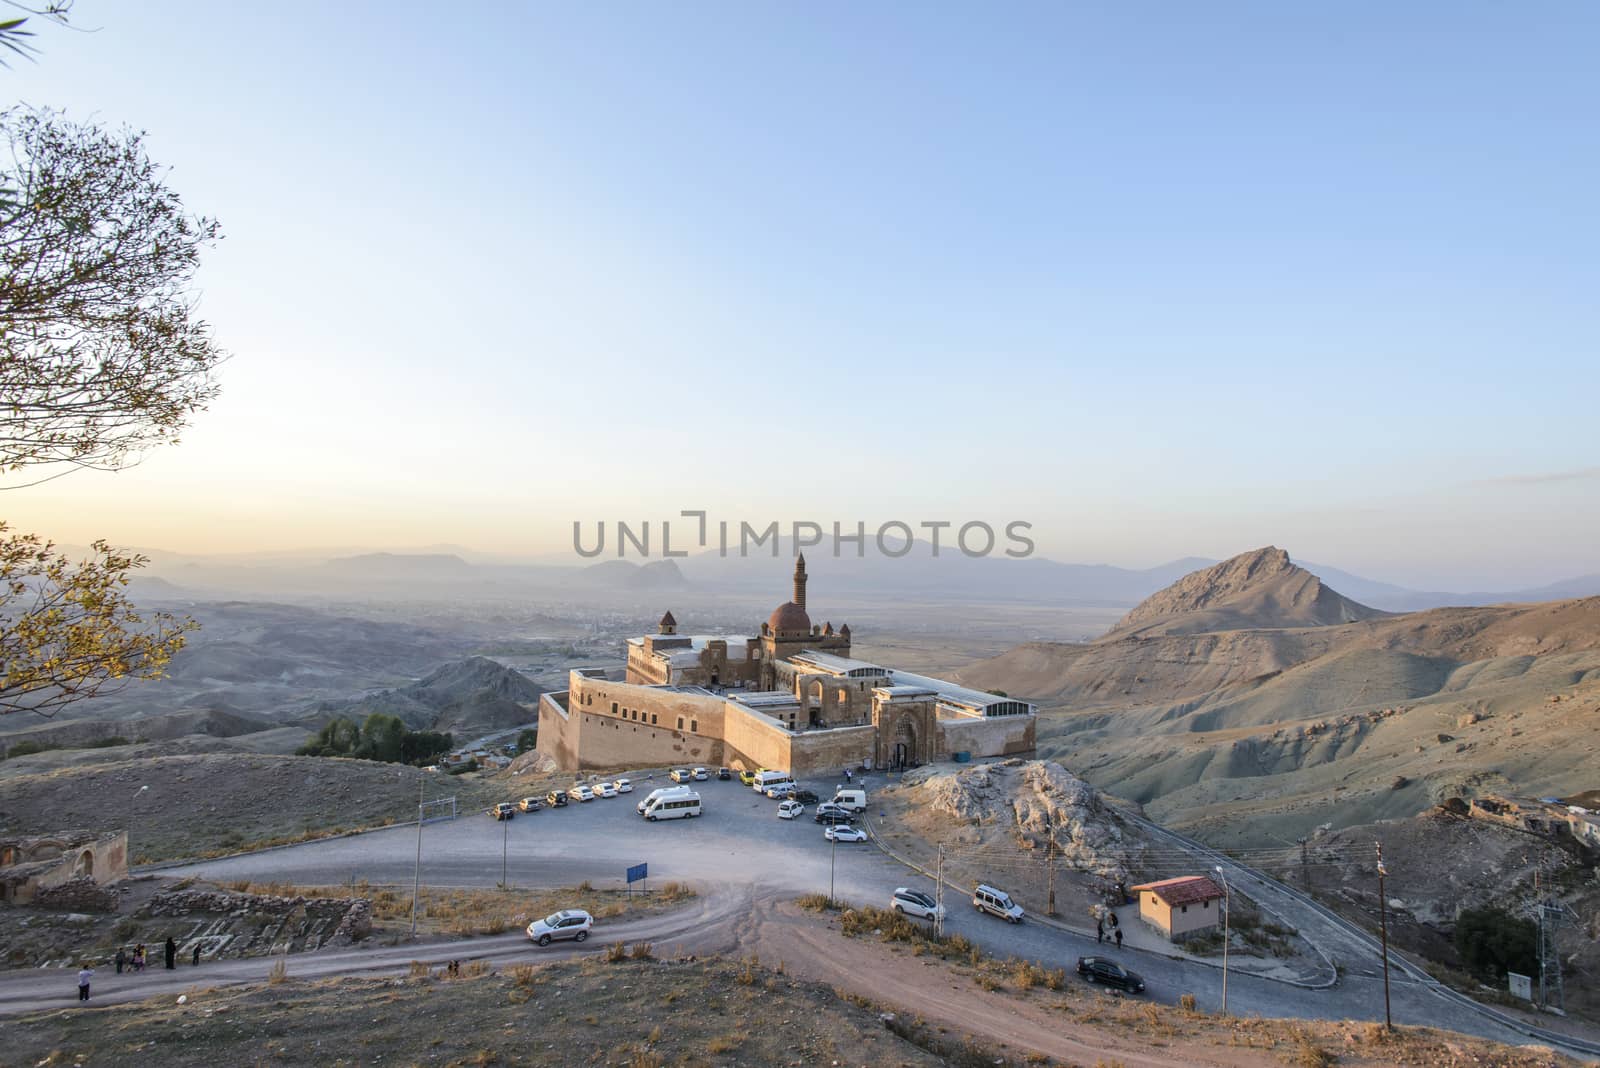 Ishak Pasha Palace (Constructed in 1685) is a semi-ruined palace located in the Dogubeyazit district of Agri province of Turkey.